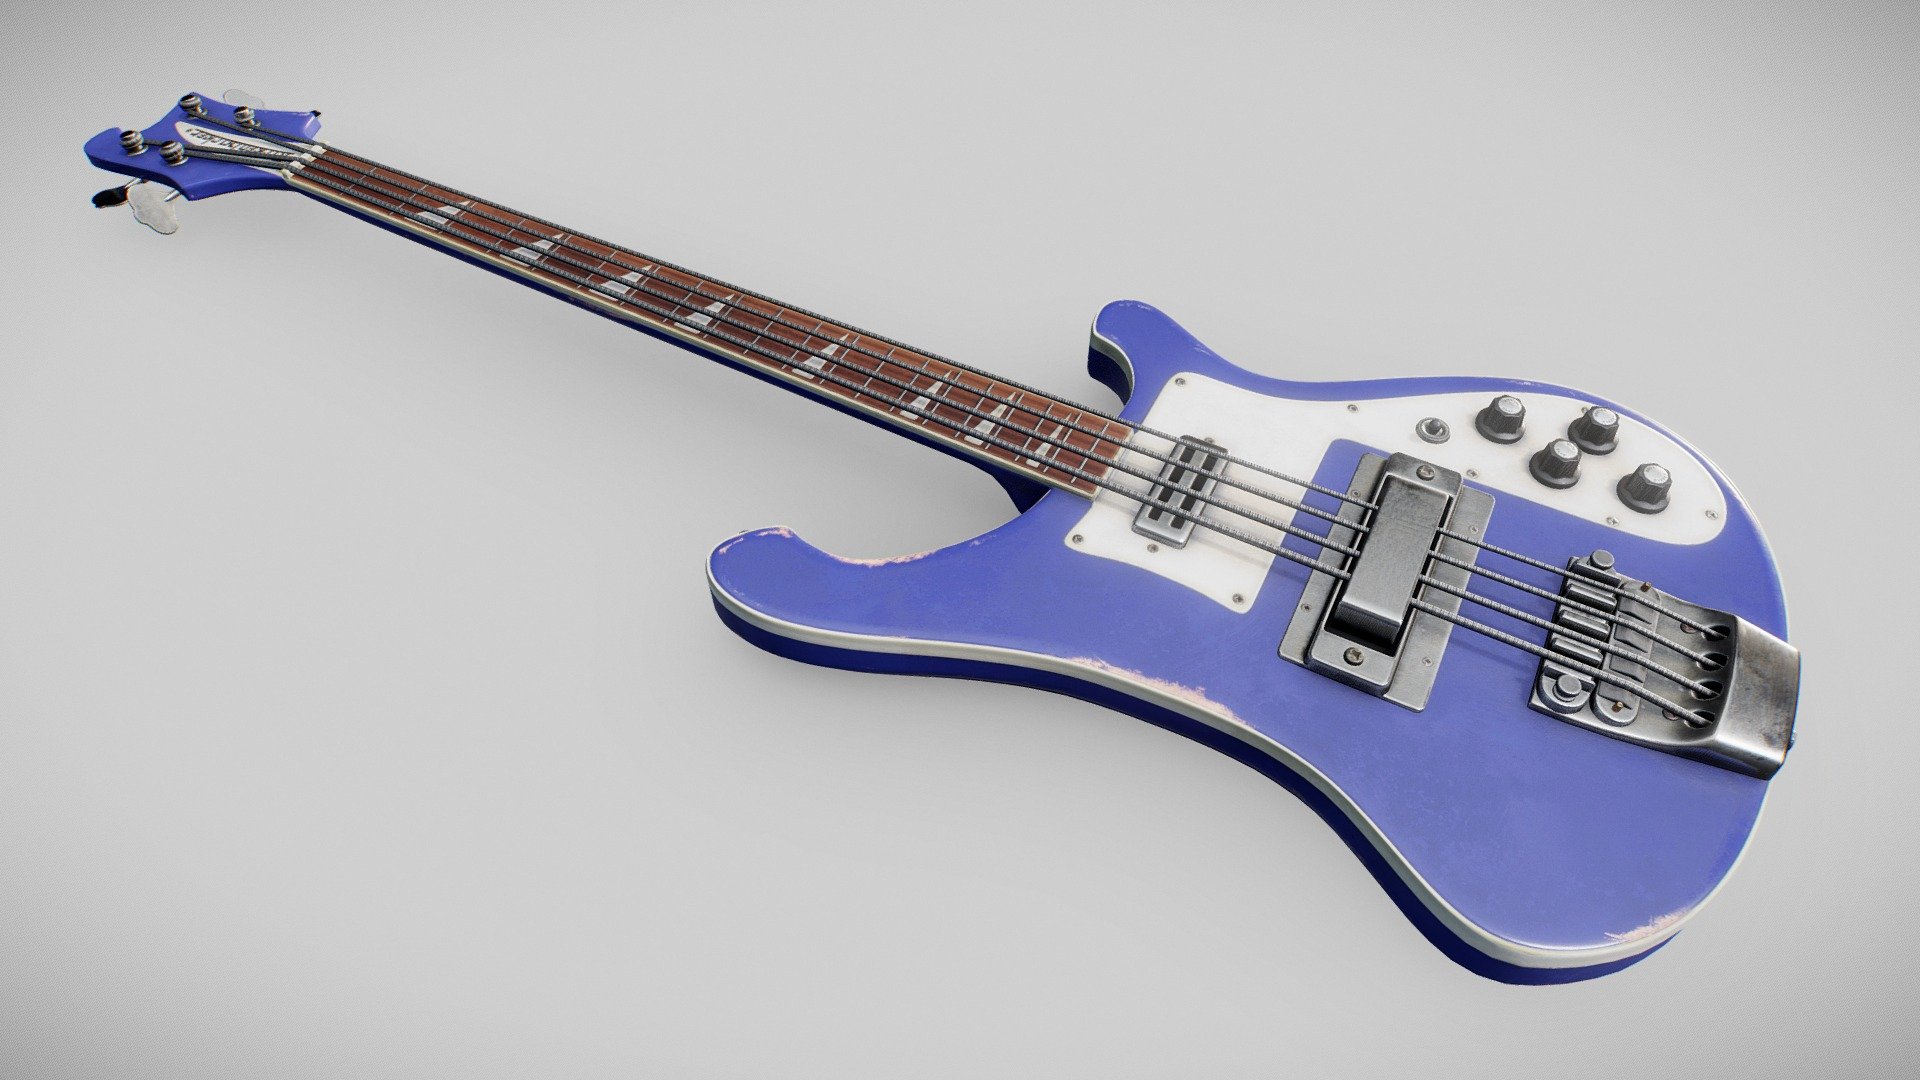 Important: A free download release of this model is available for non-commercial purposes here: https://skfb.ly/HYEN

The iconic Rickenbacker 4001 bass guitar, manufactured during the 60s and 70s, and eventually replaced with the 4003 model.

This release includes minor tweaks to the textures (better damage, slight recolor to look best in ACES) and all texture bakes and outputs. See below for more details.

The &ldquo;additional file